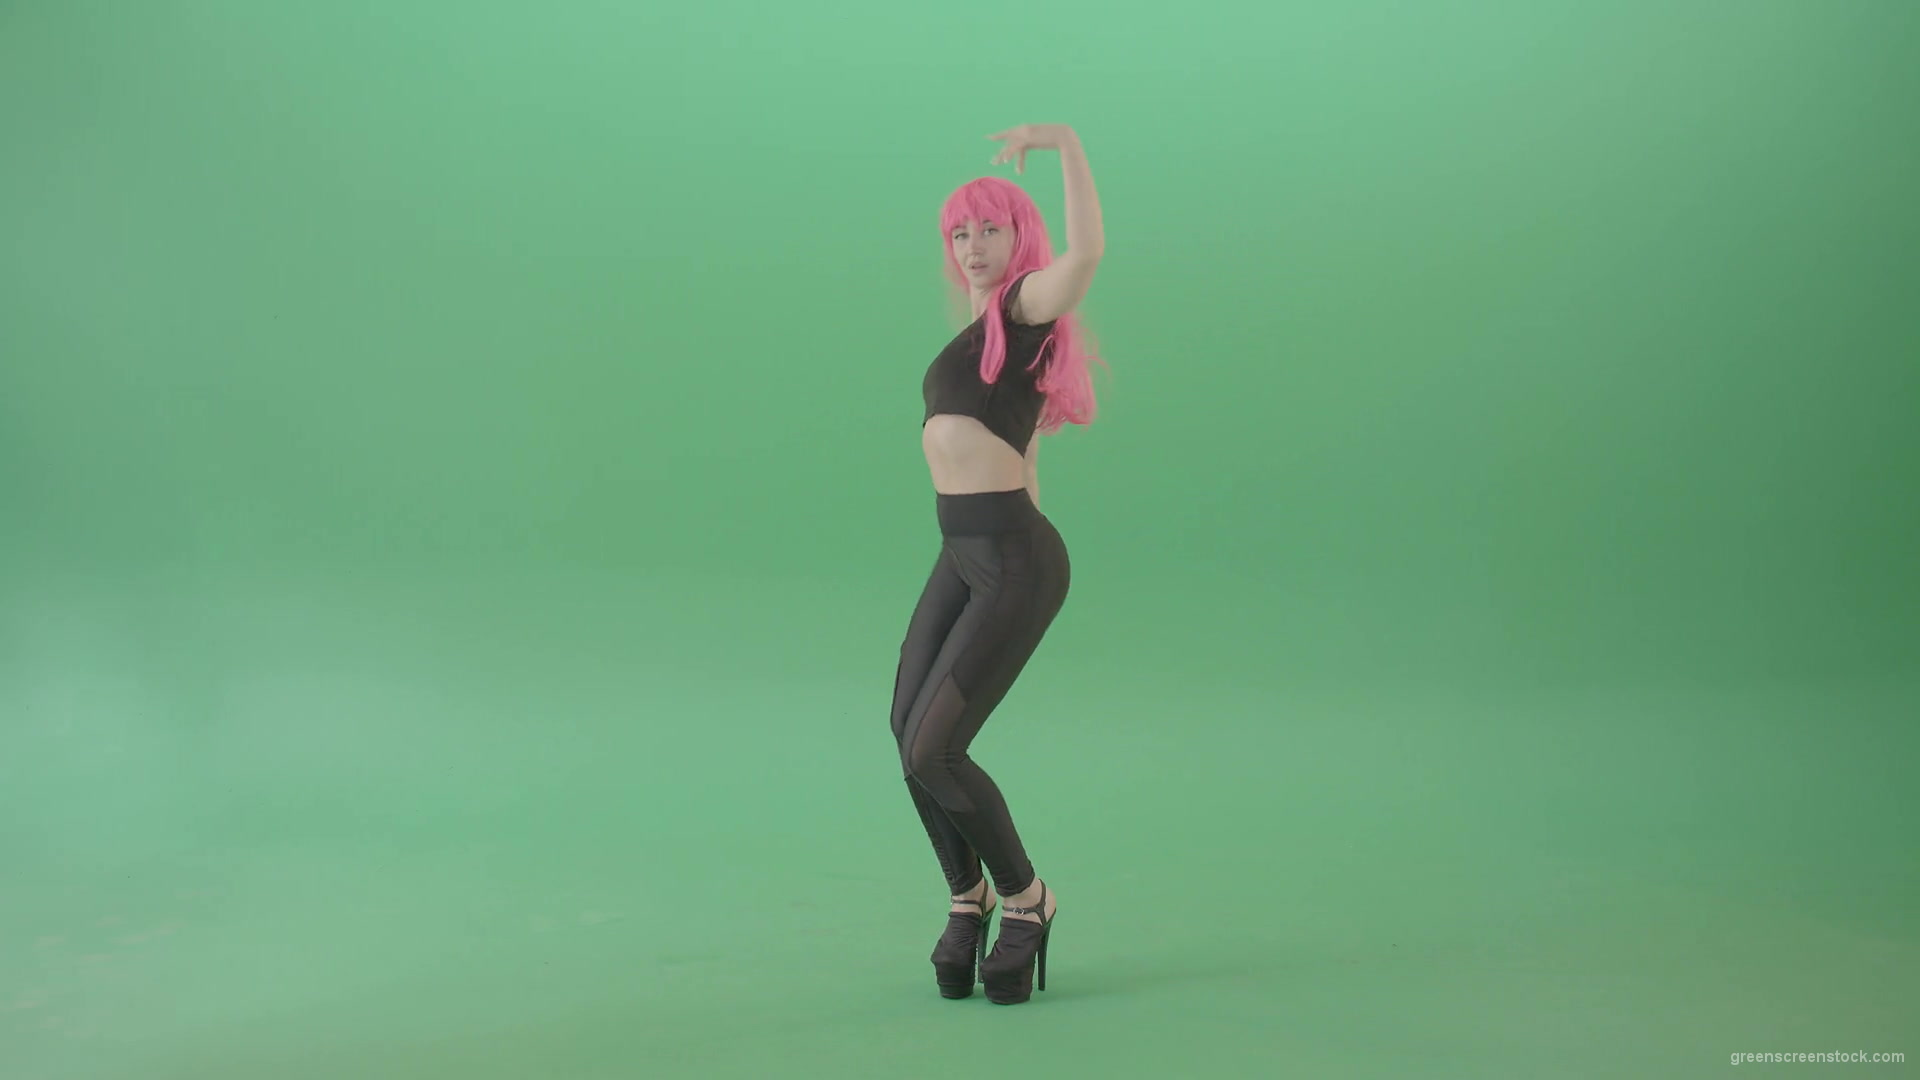 Pink-hair-girl-showing-sexy-moves-dancing-strip-on-green-screen-4K-Video-Footage-1920_004 Green Screen Stock